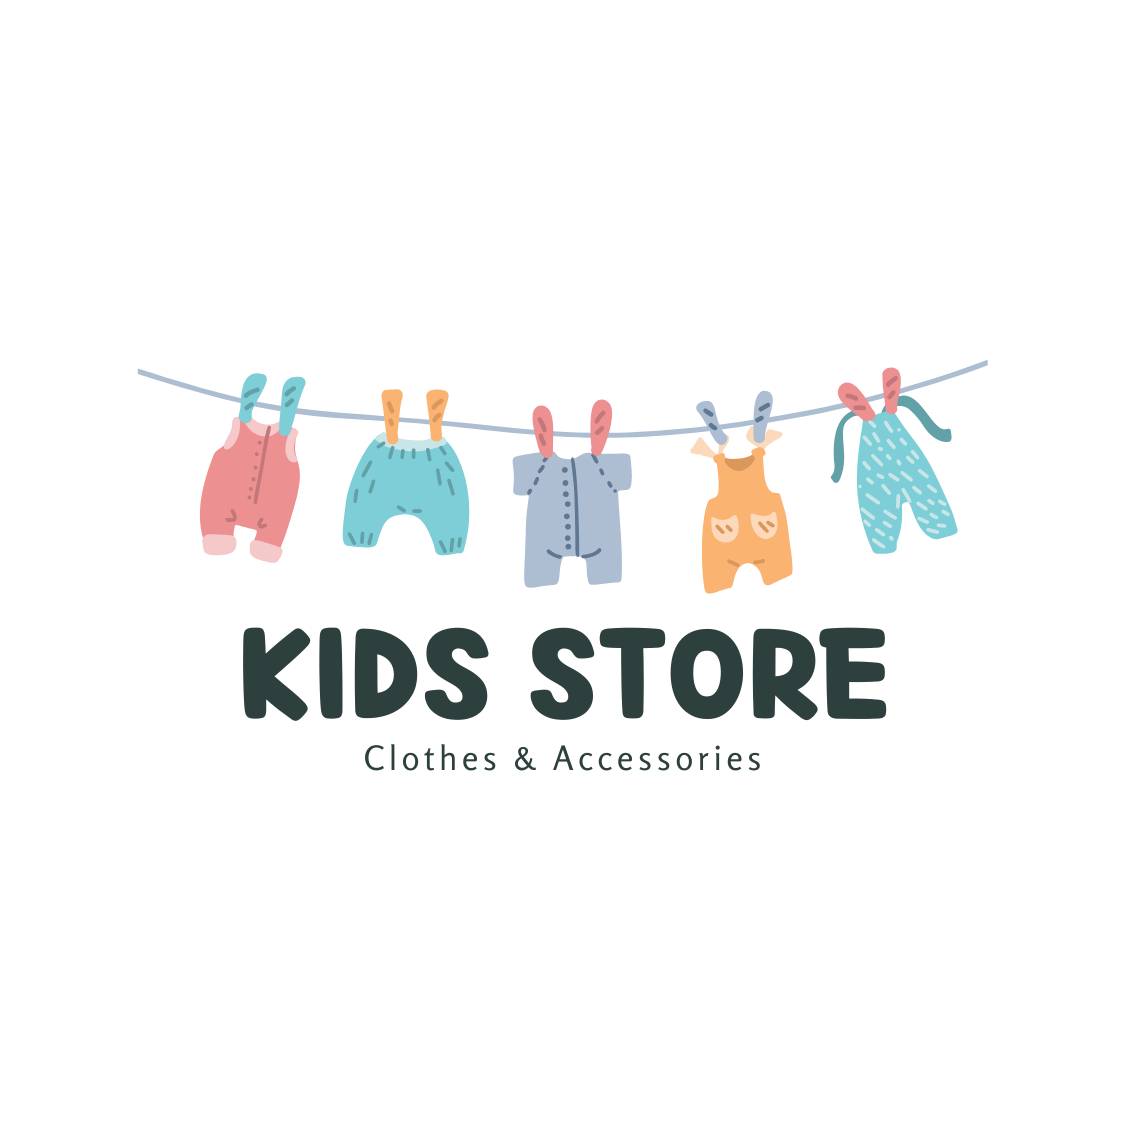 6 in 1 kids toys and fashion logos bundle pinterest preview image.